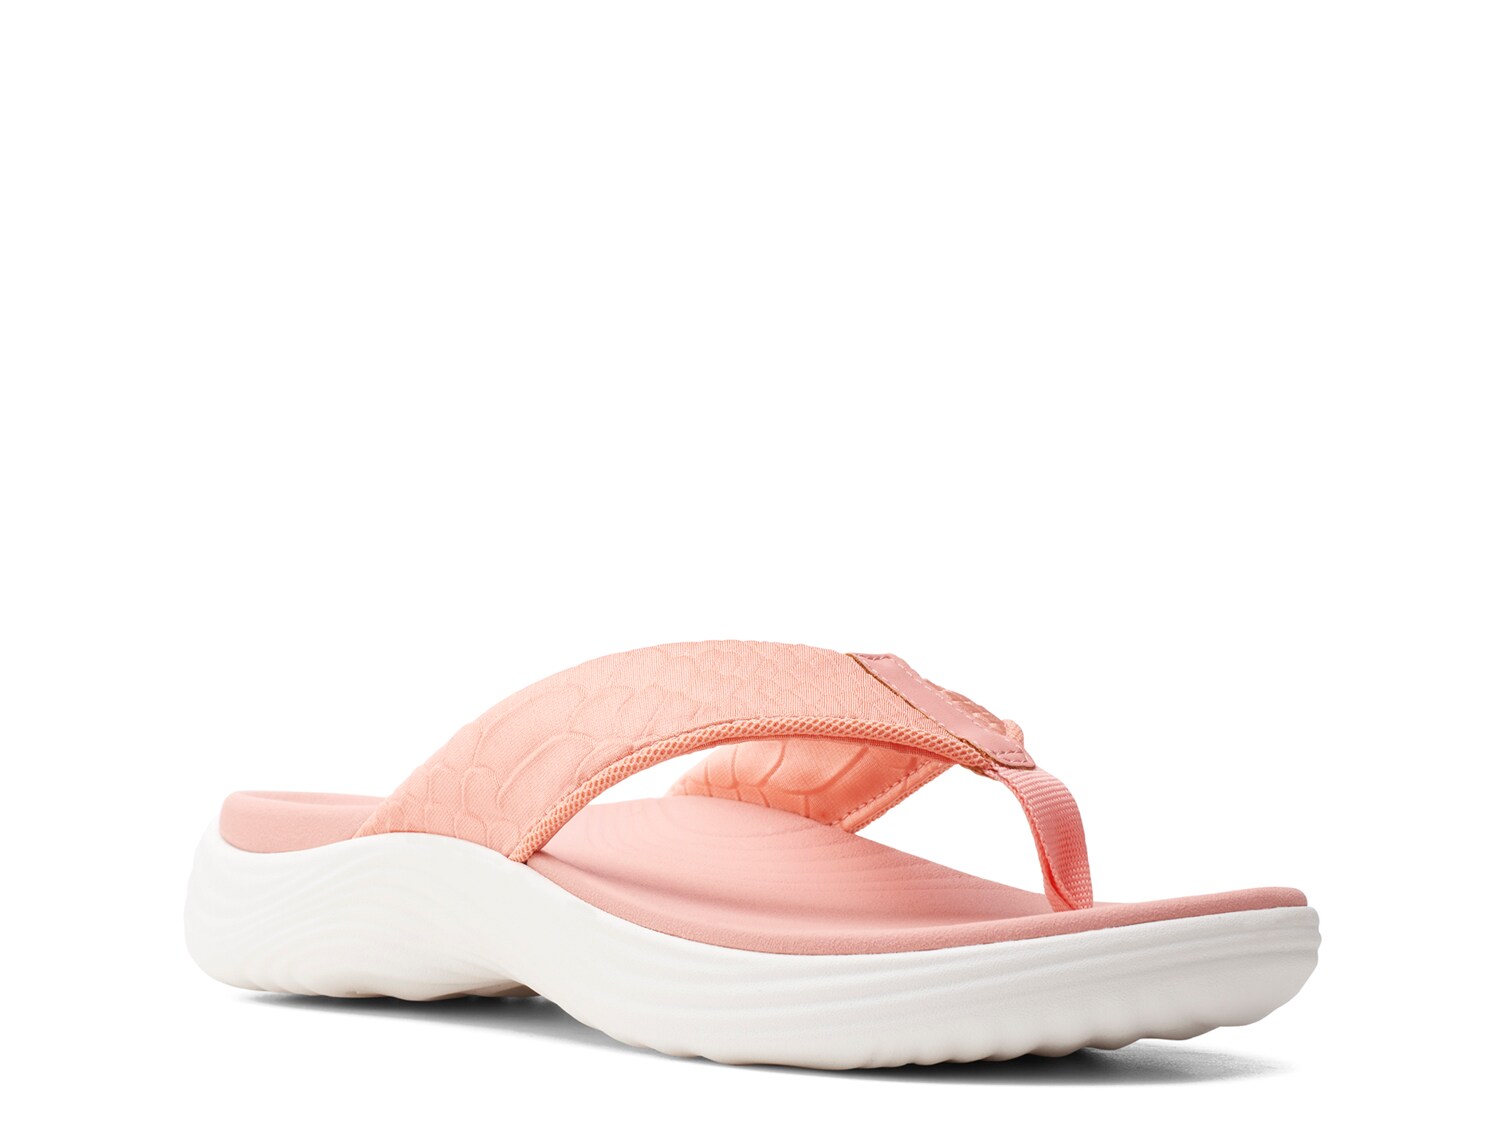 cloudsteppers by clarks shoes